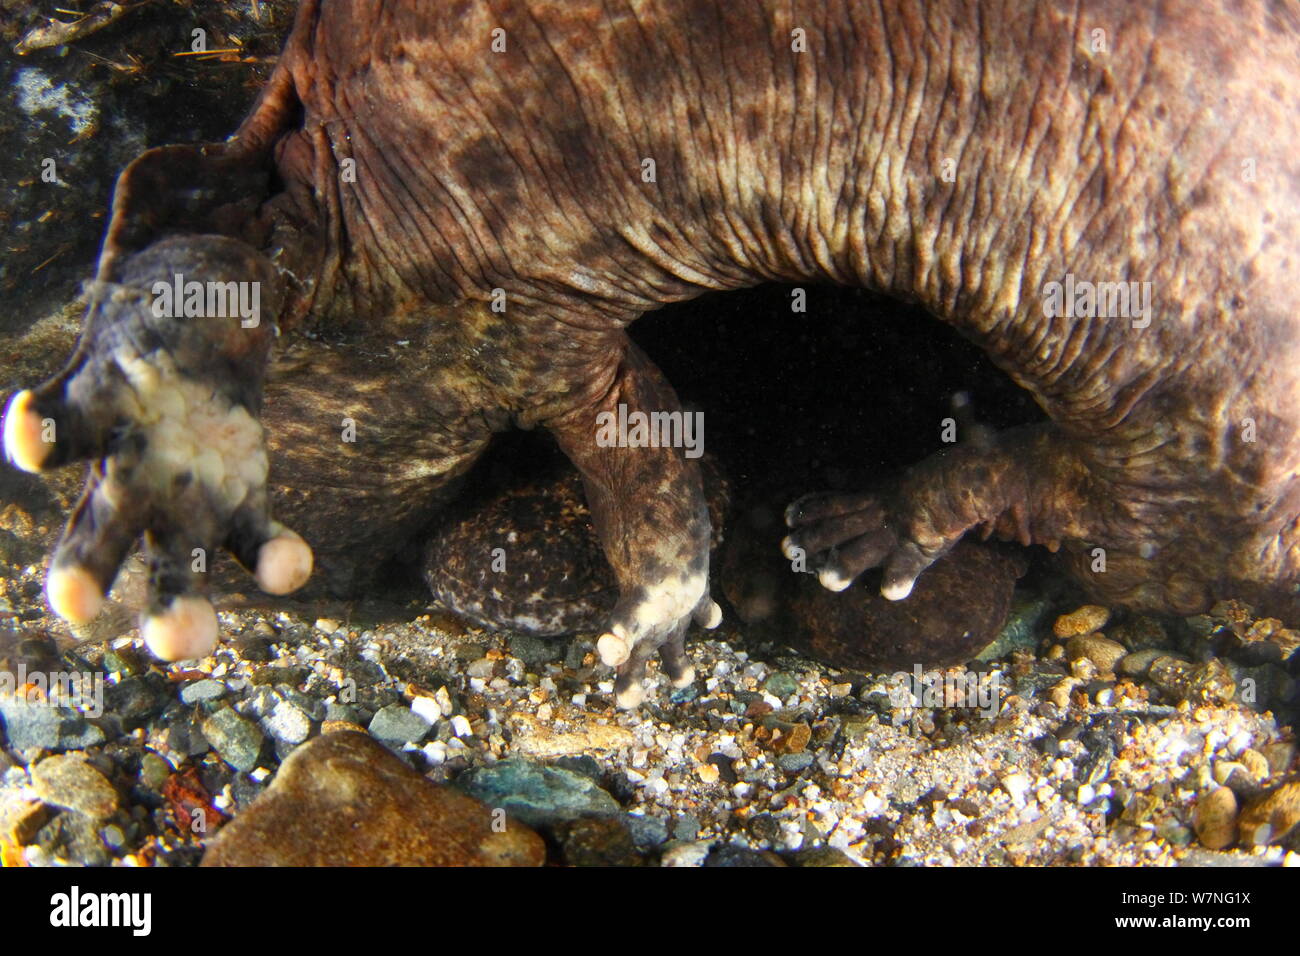 Two Japanese giant salamanders (Andrias japonicus) fighting at the entrance to a nest, Japan, August Stock Photo